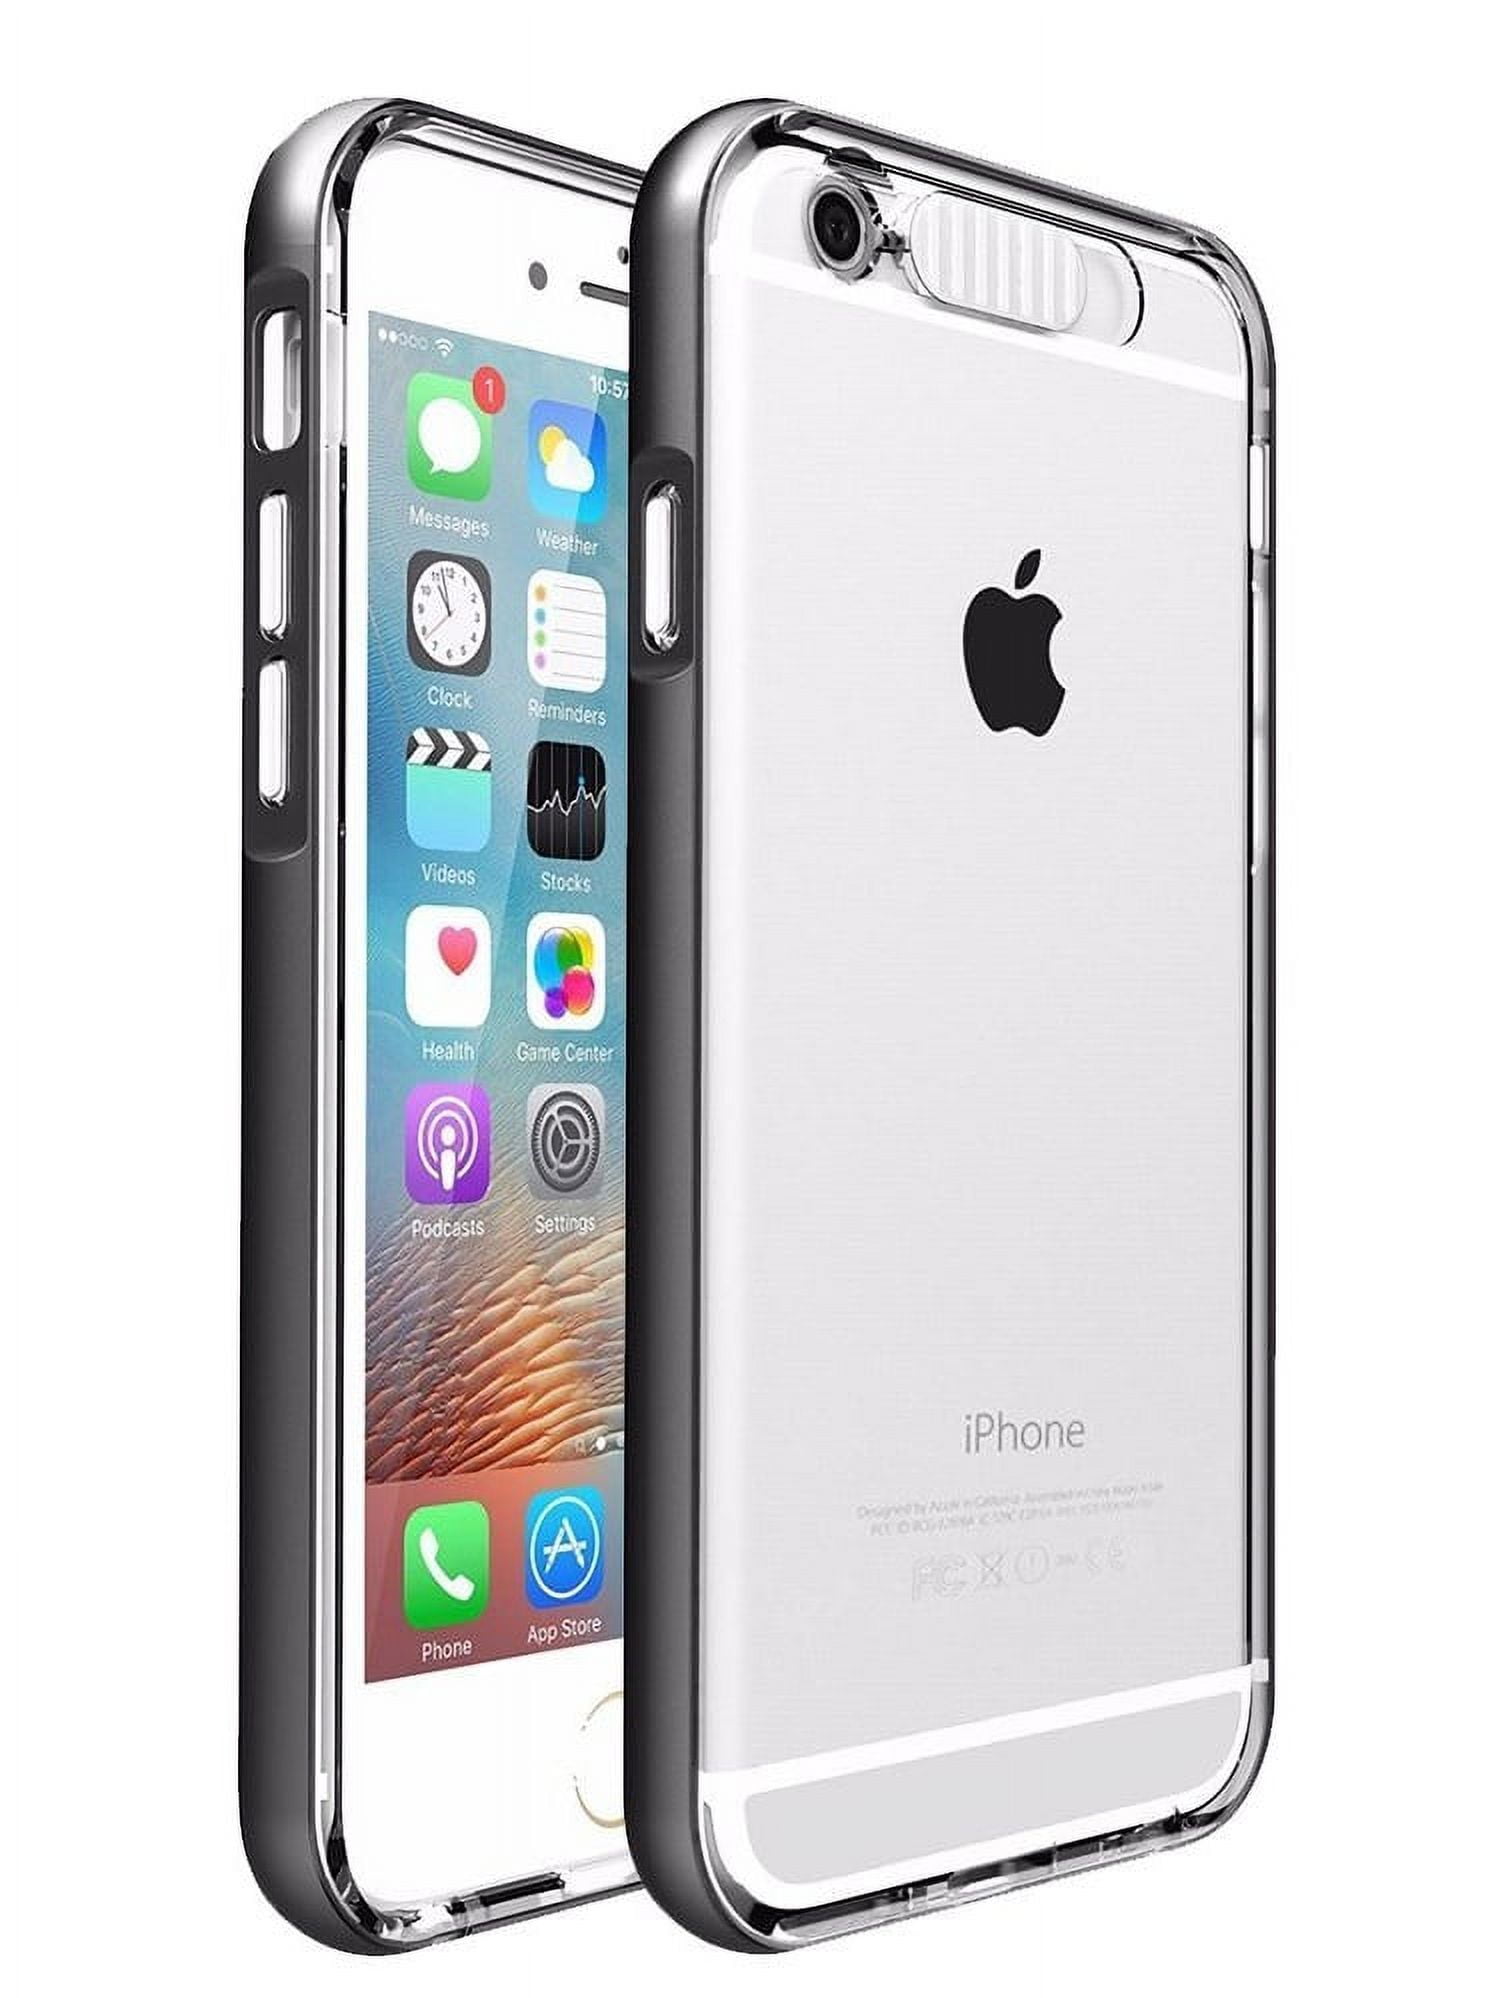  JETech Case for iPhone SE 2016 (Not for 2020), iPhone 5s and  iPhone 5, Non-Yellowing Shockproof Phone Bumper Cover, Anti-Scratch Clear  Back (Clear) : Cell Phones & Accessories